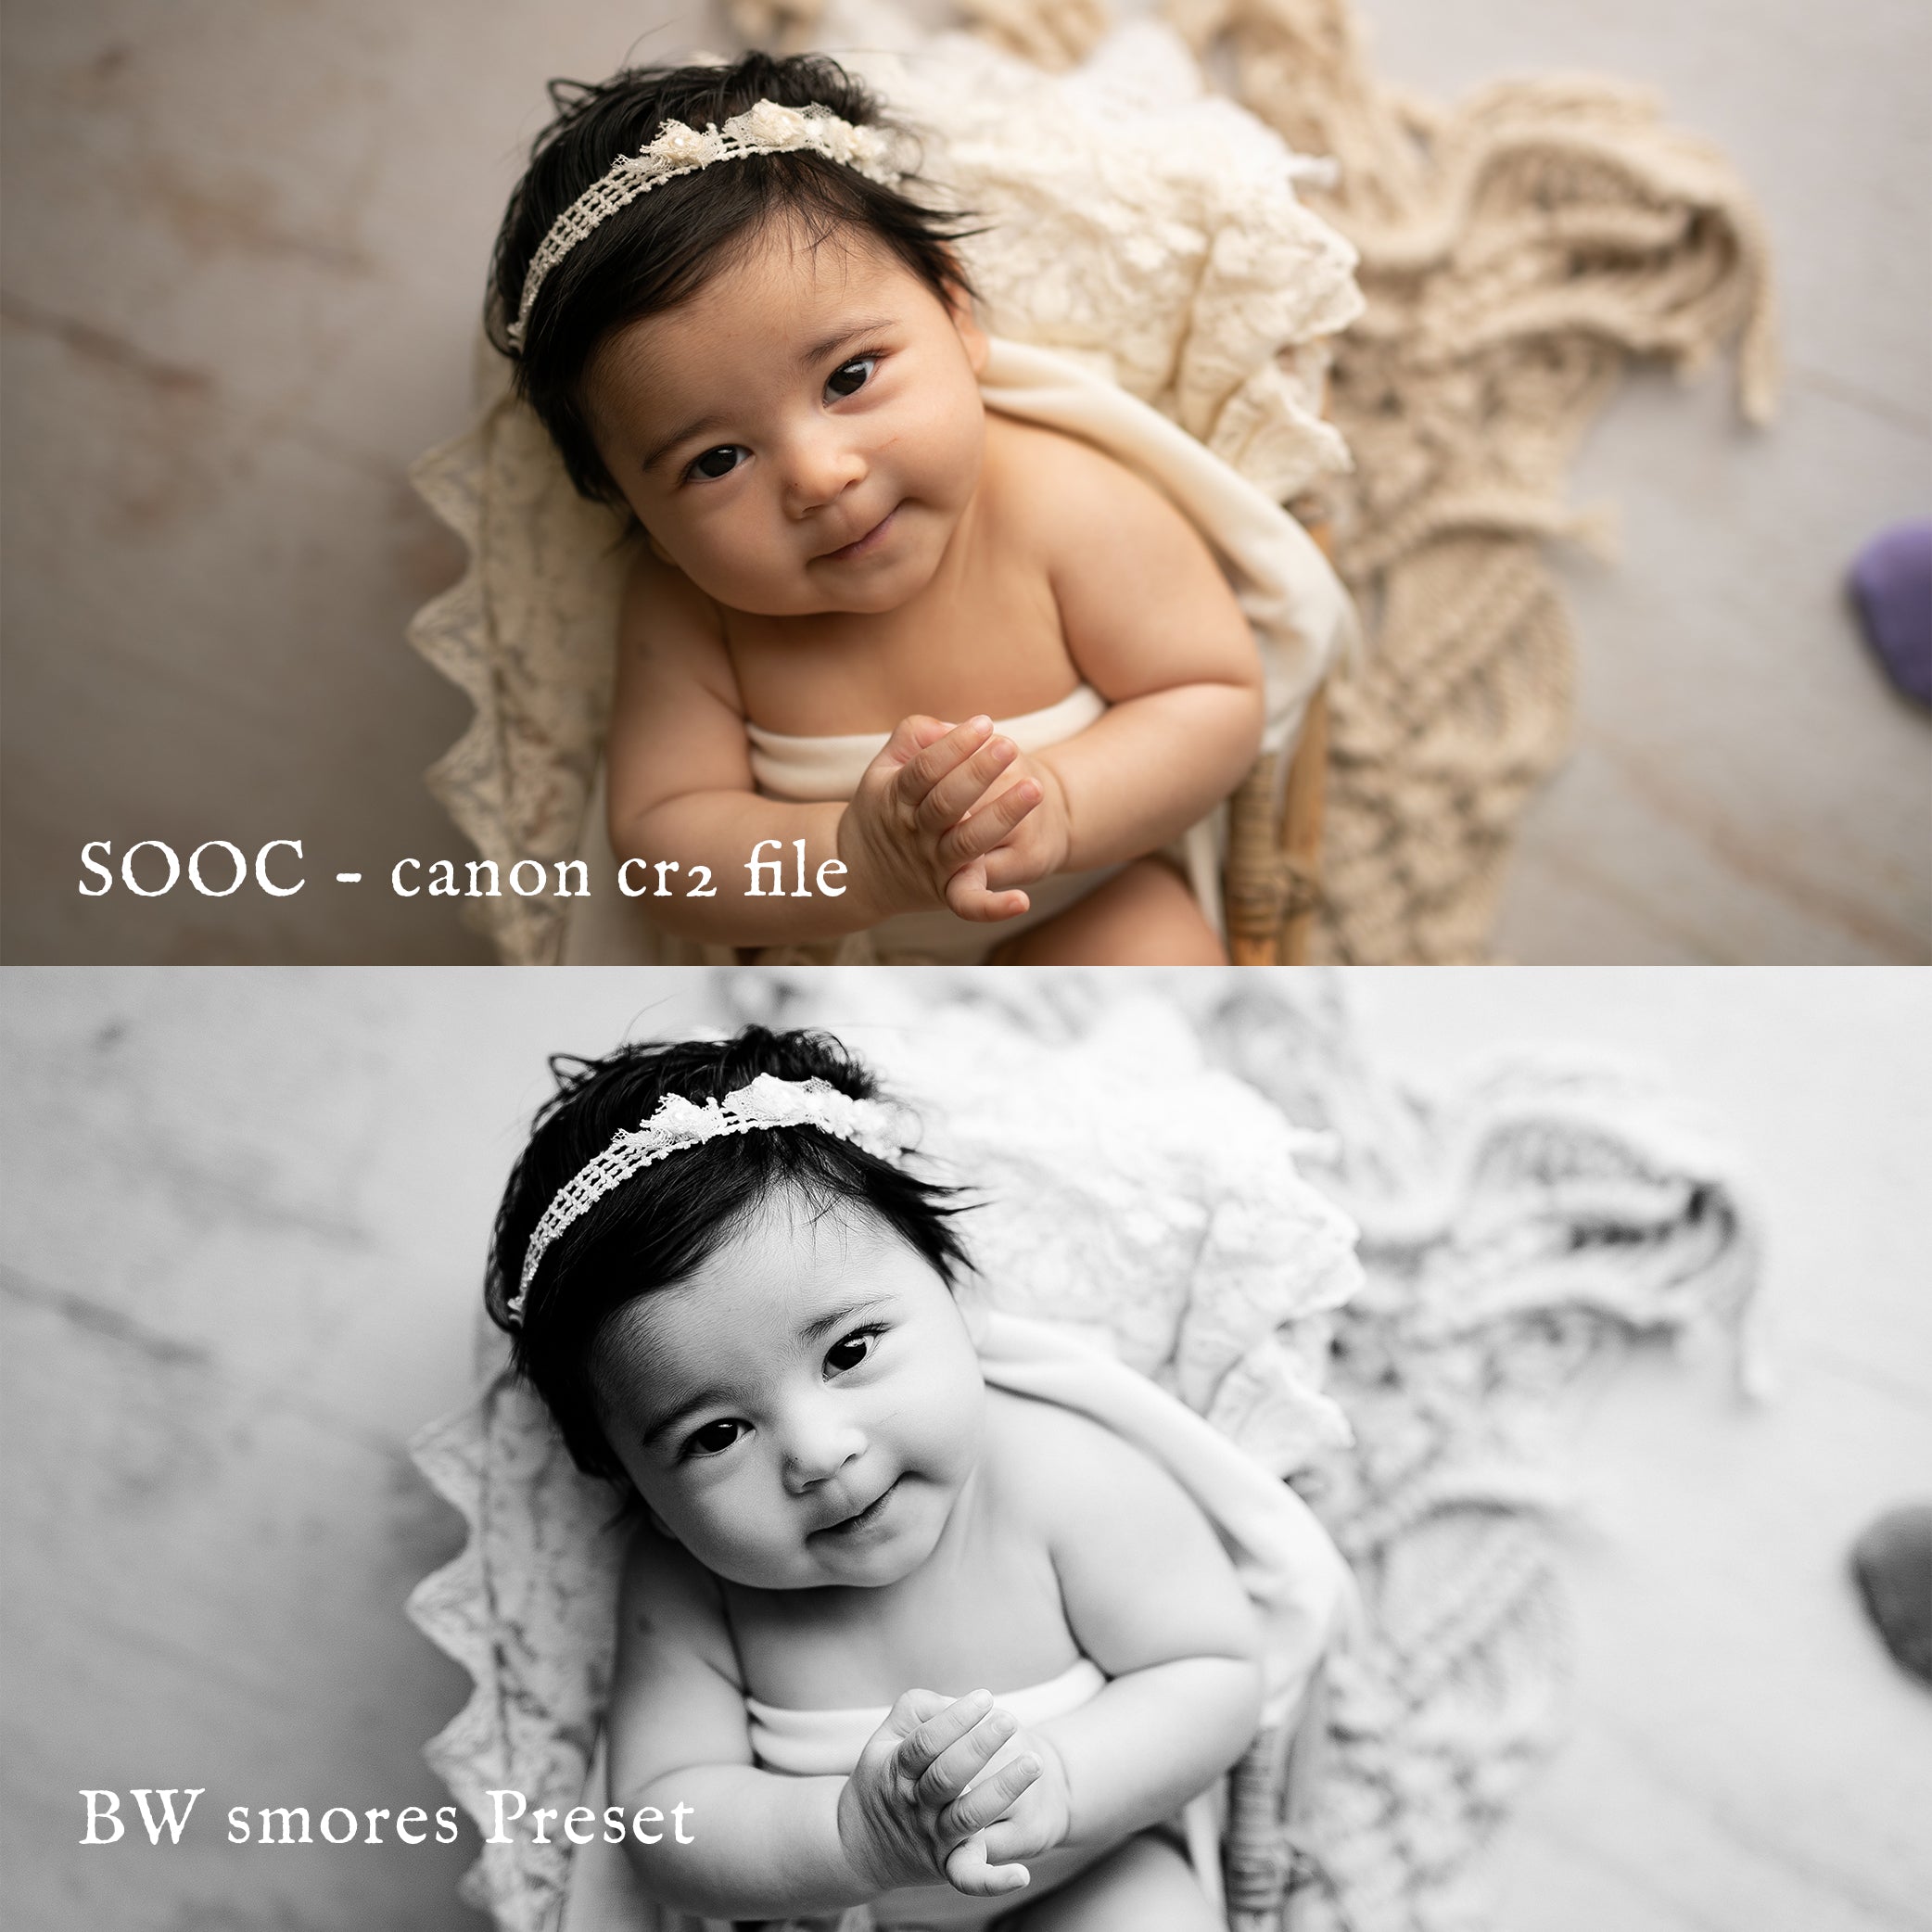 Newborn Photography Lightroom Presets for Newborn Baby & Maternity Photographers Cake Smash Presets for Lightroom Newborn Lightroom Presets & Newborn Photoshop Actions by Jessica G. Photography Black & White Preset